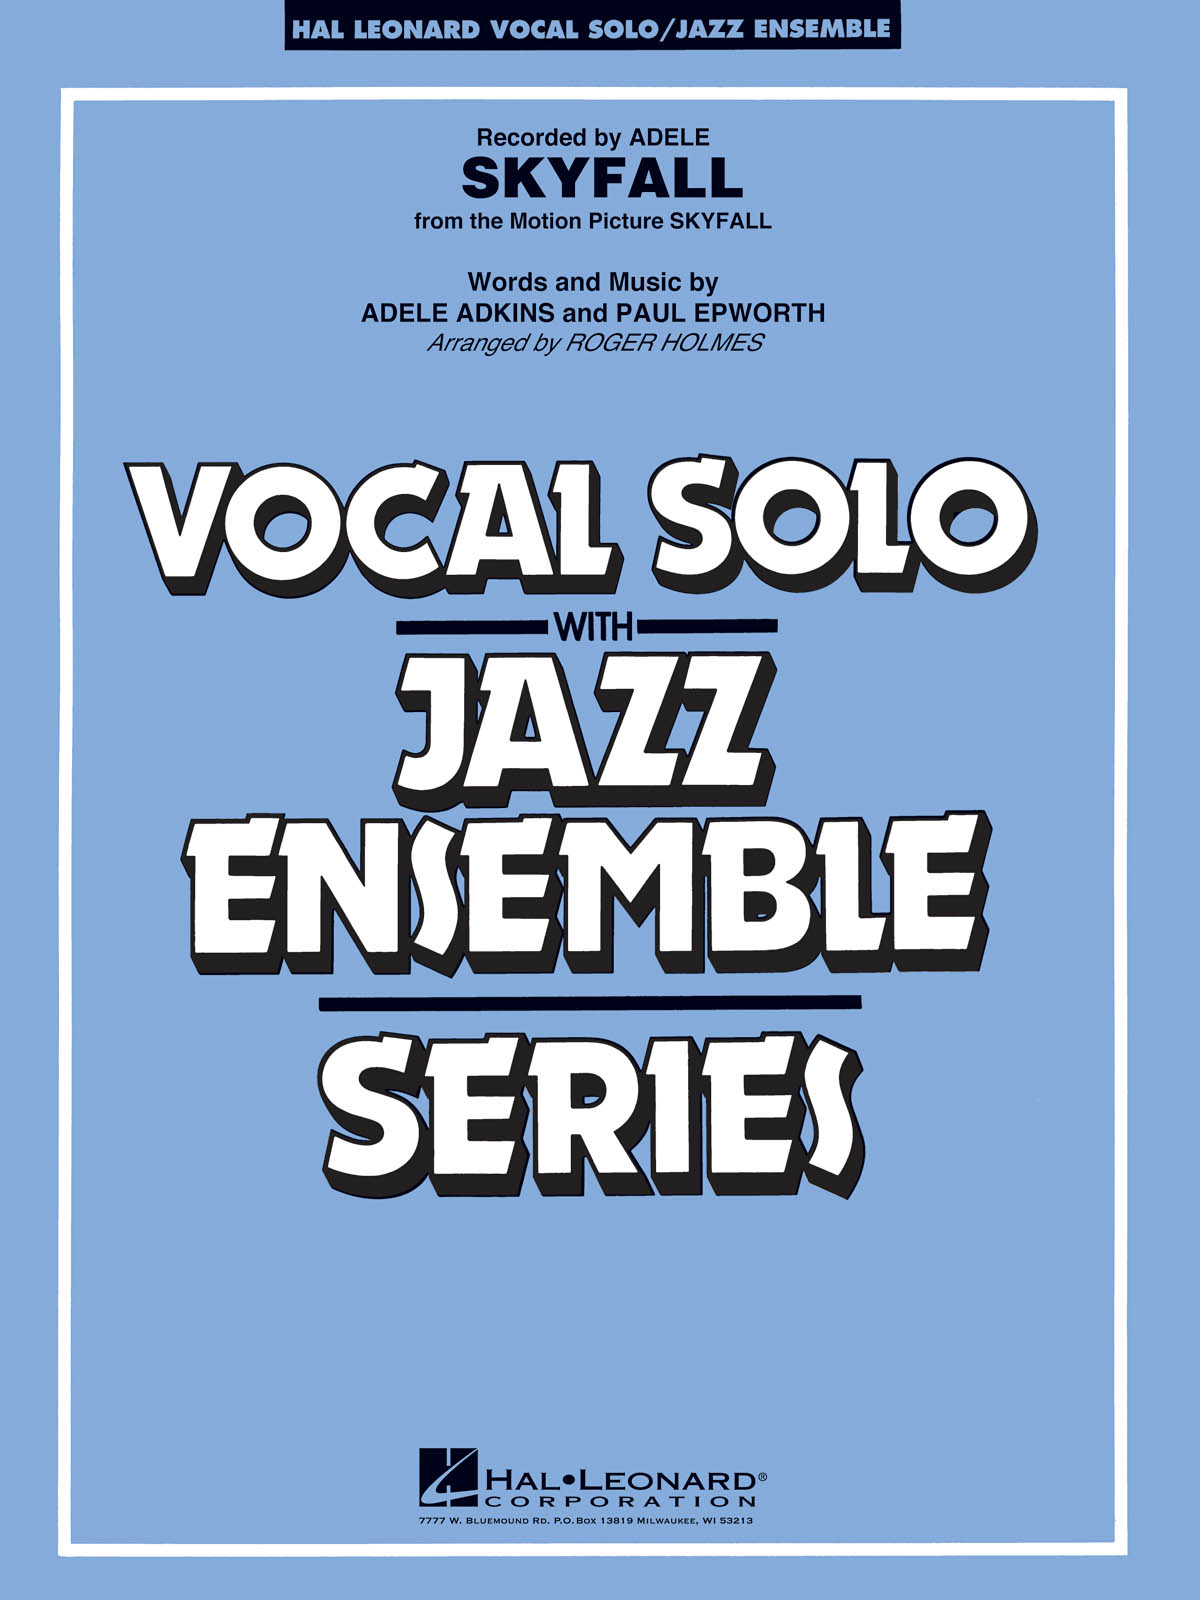 Paul Epworth: Skyfall (Key: Cmi): Jazz Ensemble and Vocal: Score and Parts